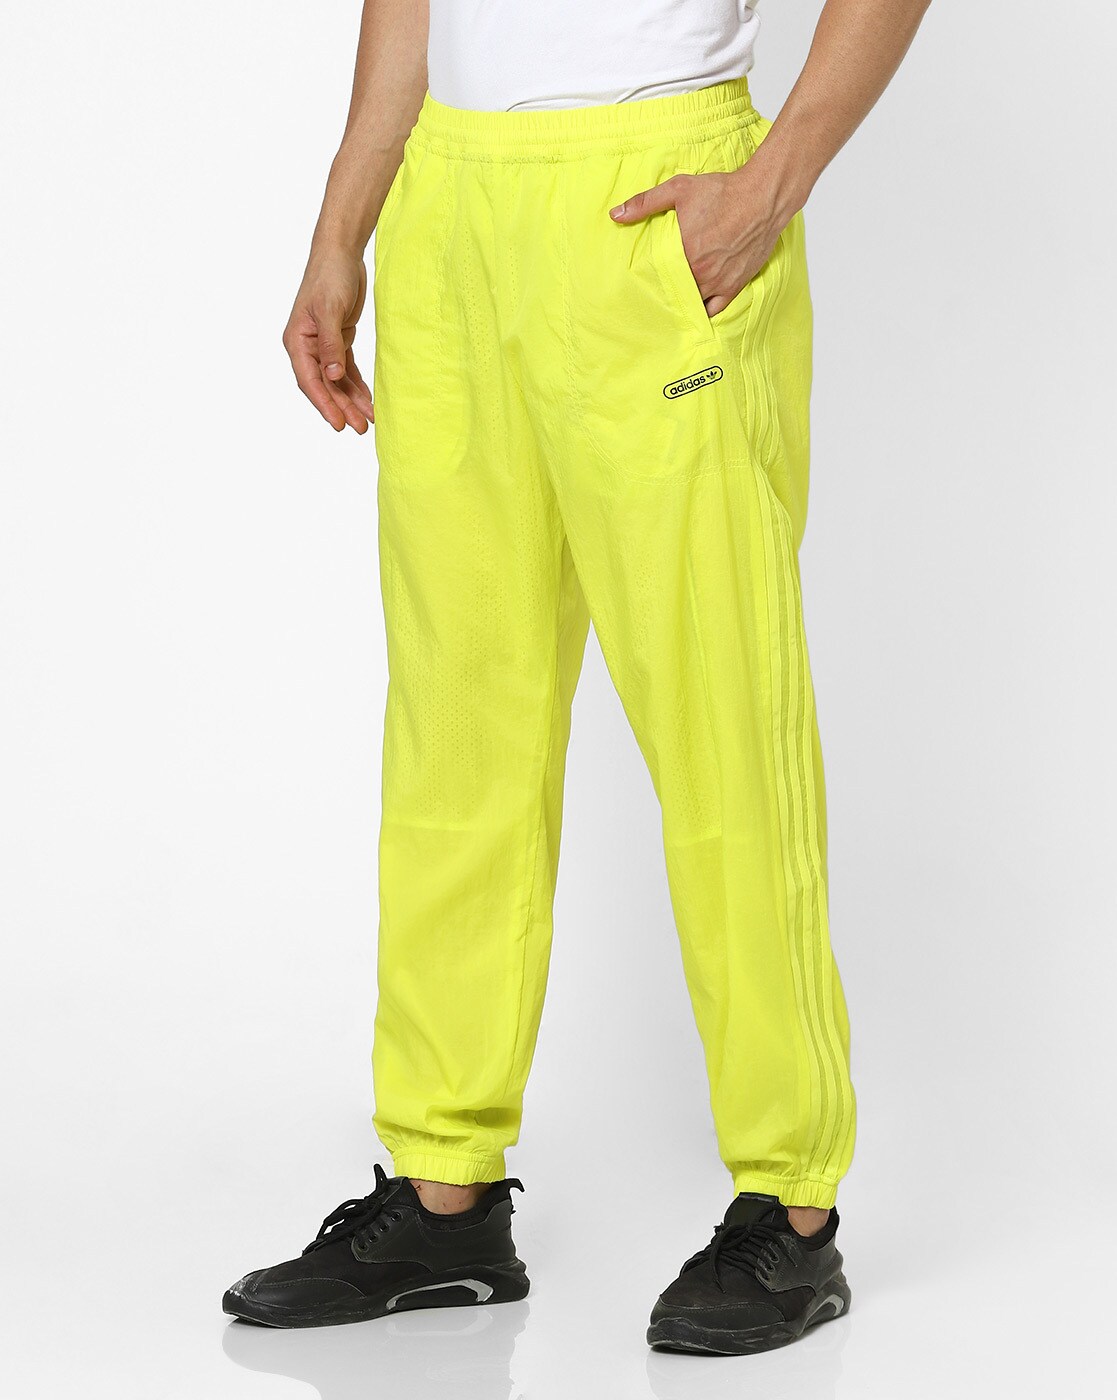 Yellow Denali fleece and shell track pants | The North Face | MATCHES UK